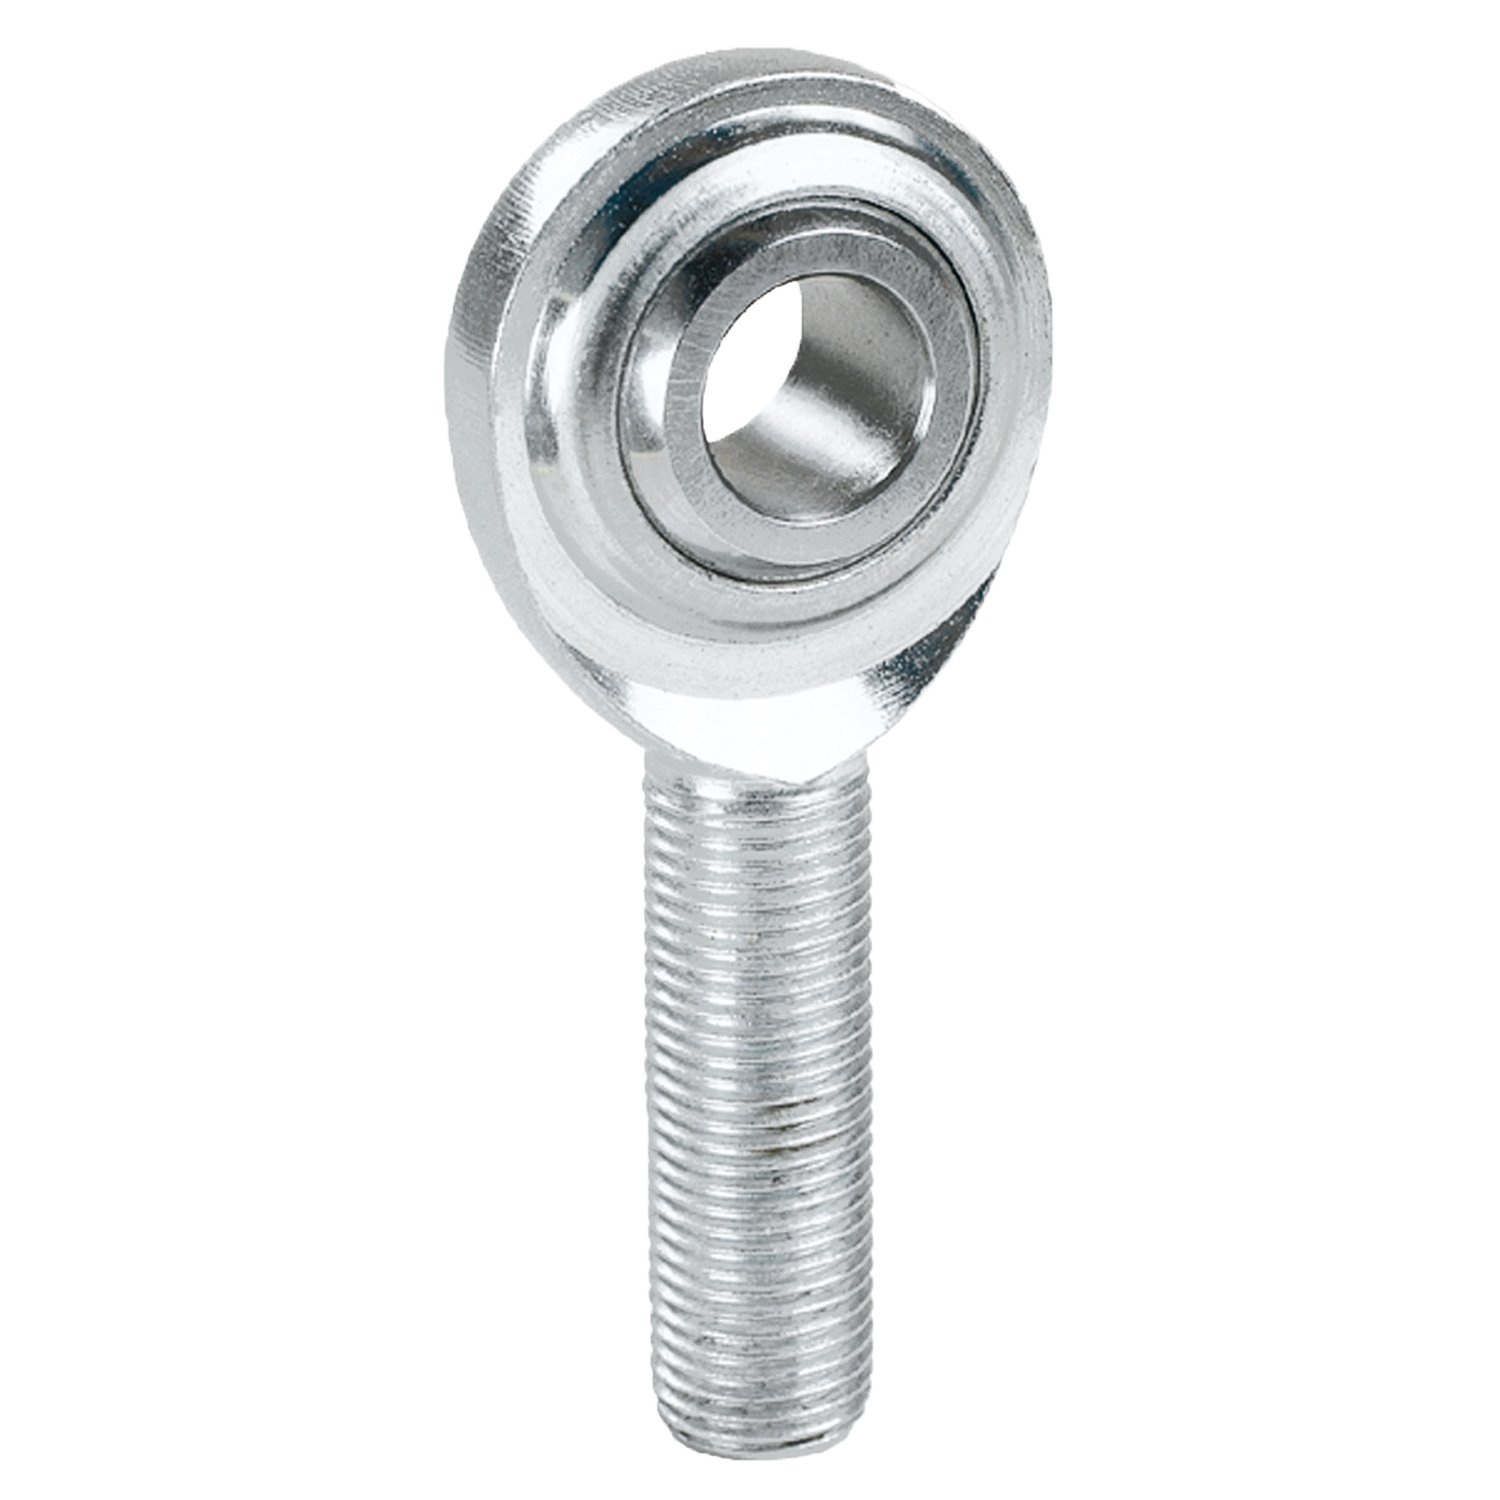 MGM-T Series Stainless Steel Rod End Hole I.D.: 6 mm